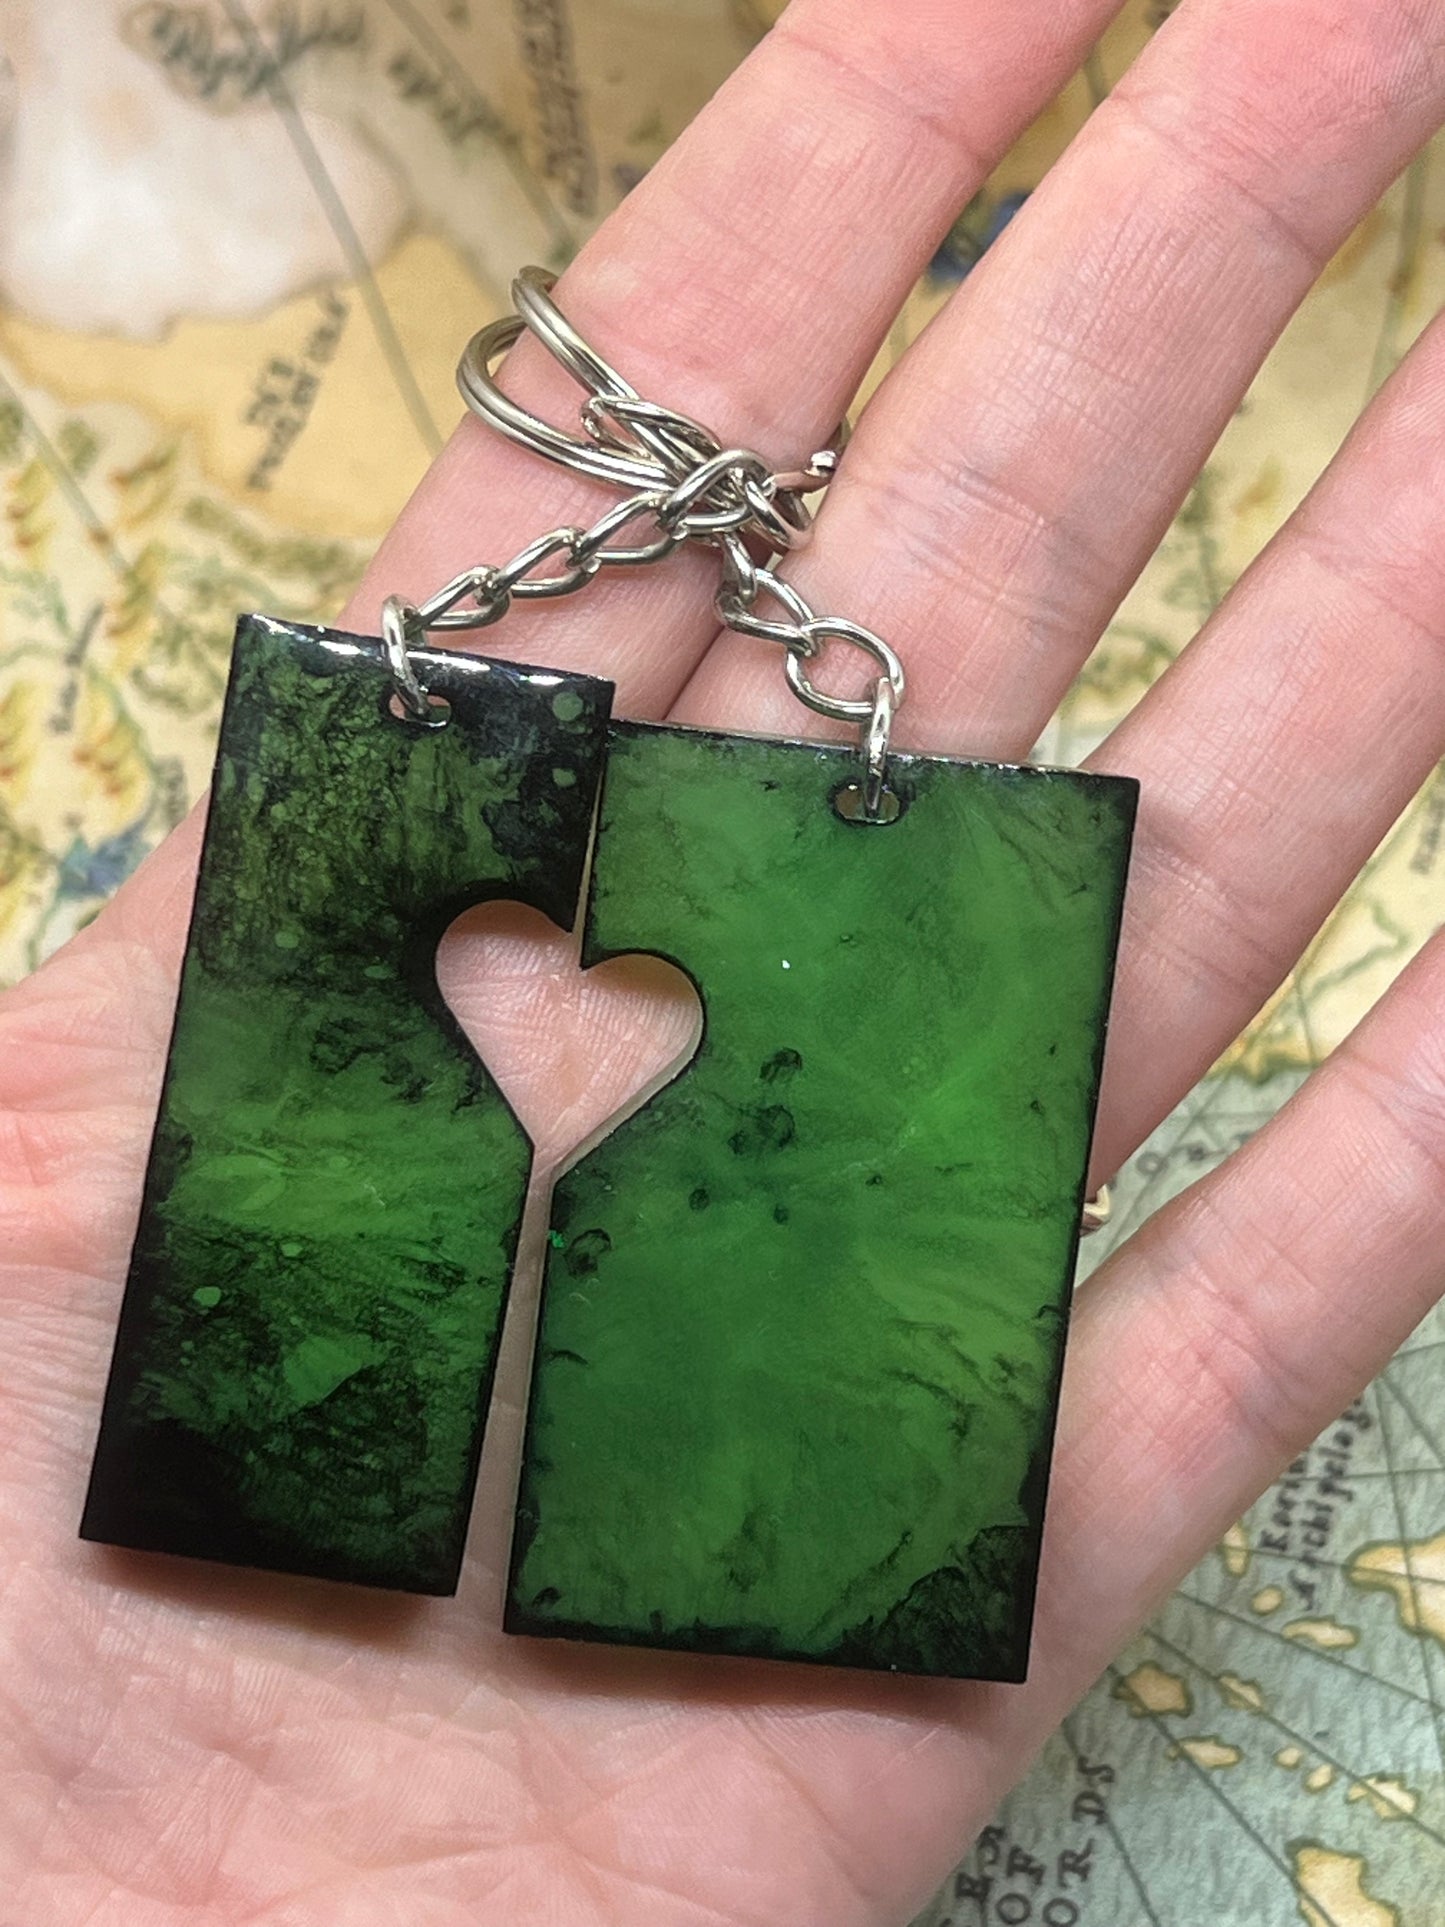 Matching green and black keychain